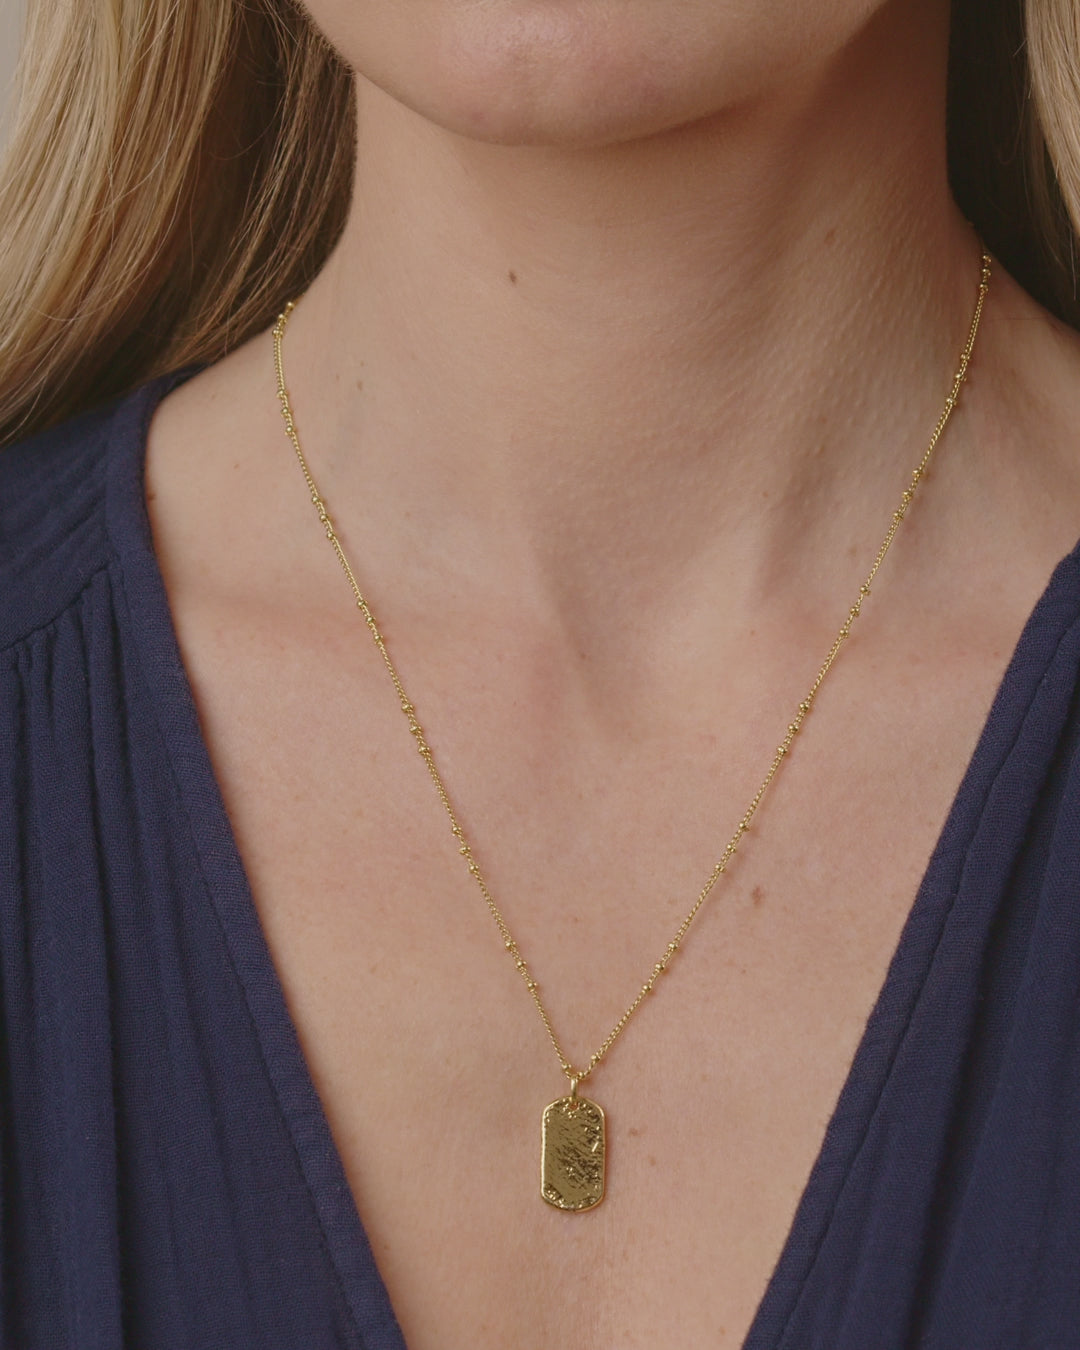 Inspirational Tag Necklace | Necklace, 18kt gold, Tag necklace